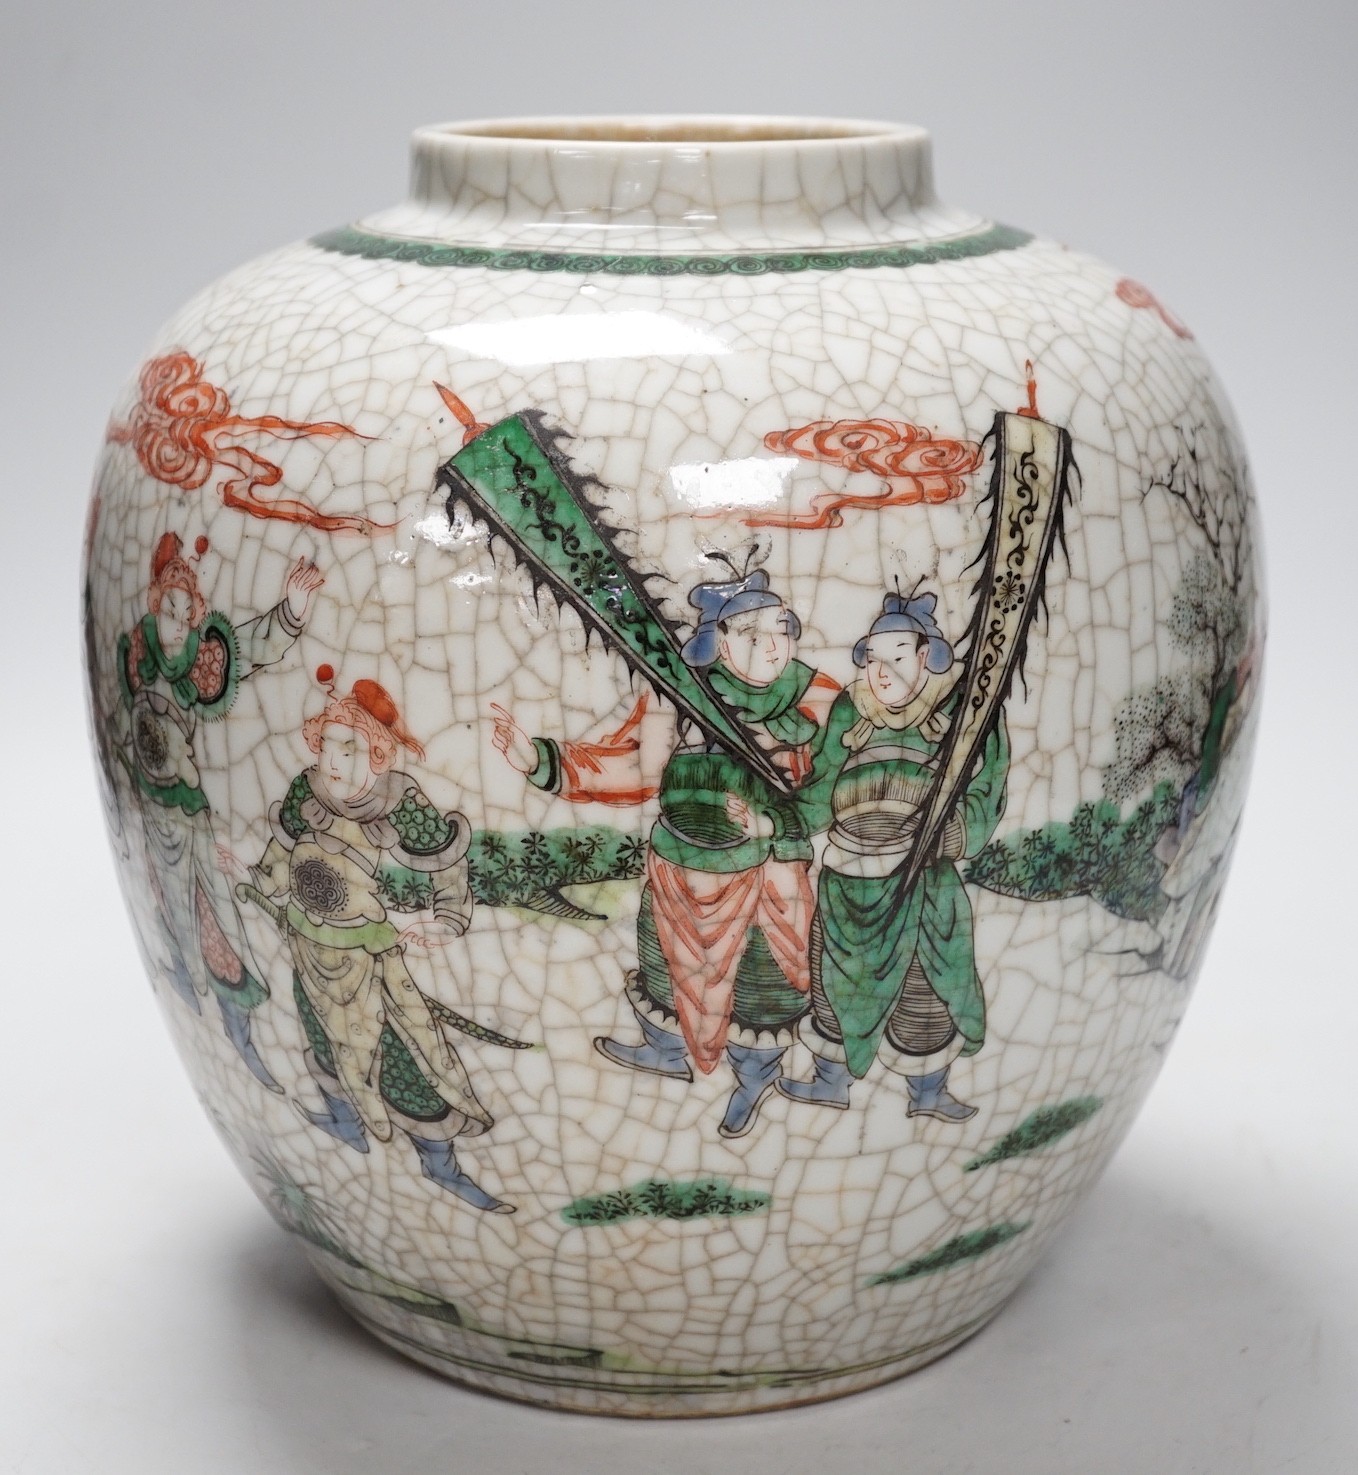 A large Chinese famille verte crackle glaze jar, late 19th century, 25cm